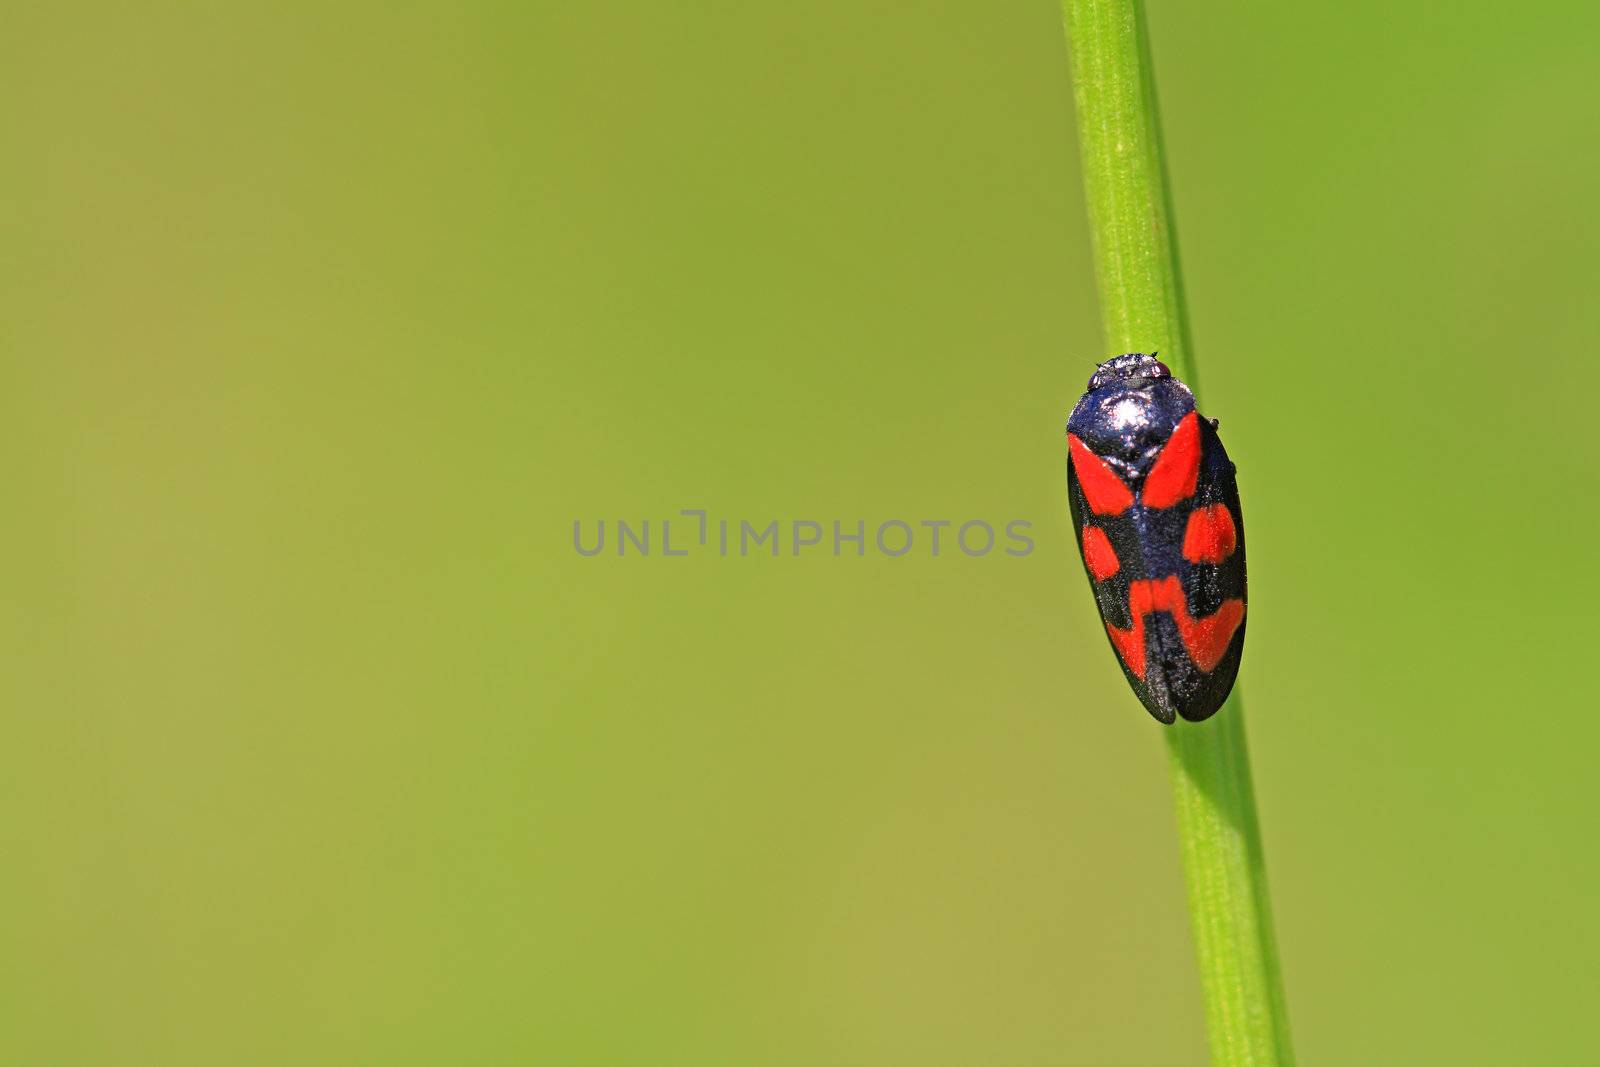 red bug on green background